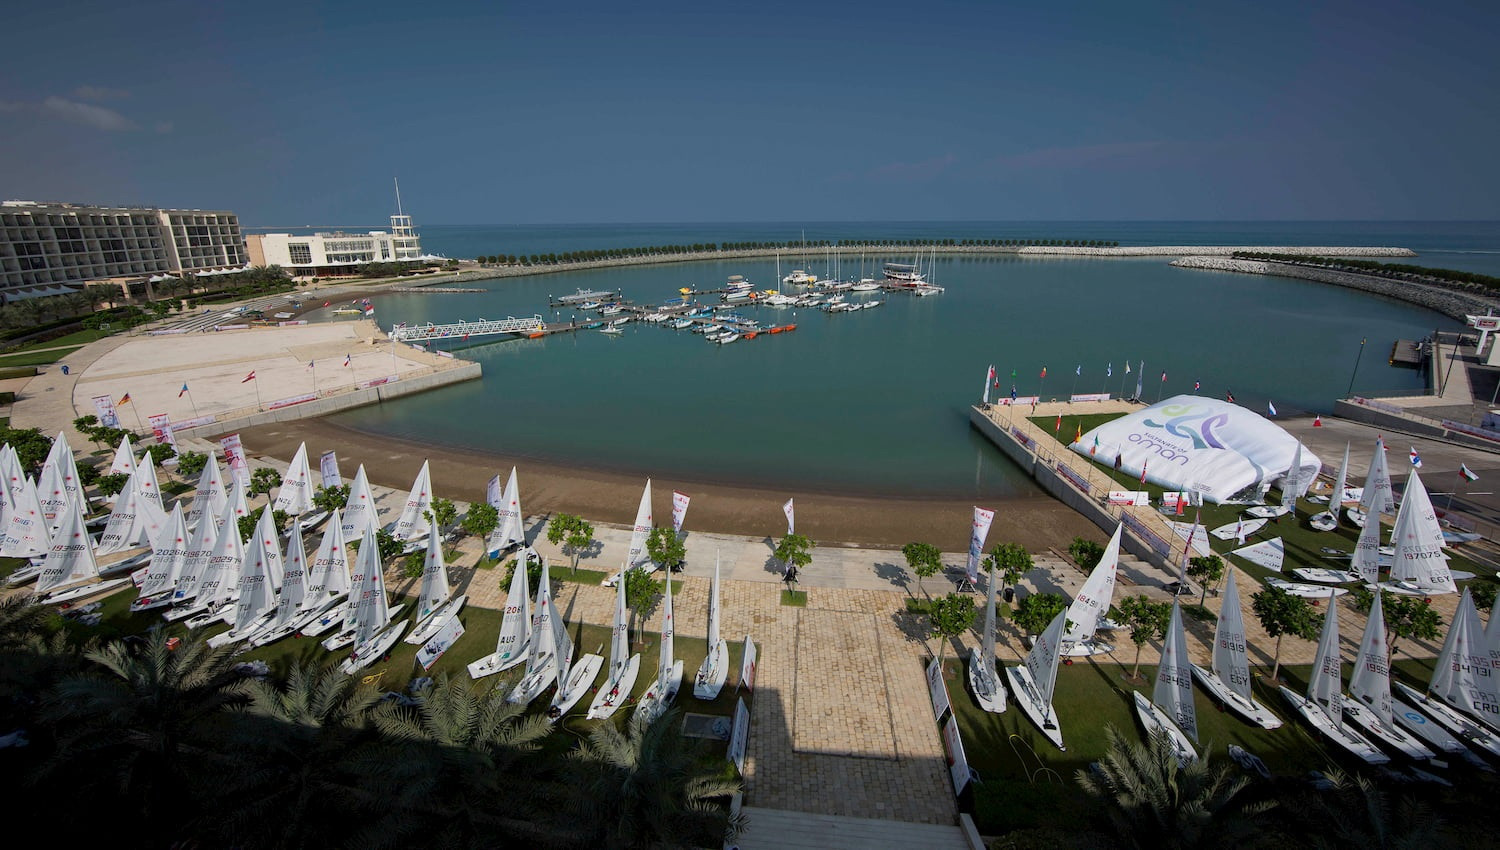 Al-Mussanah Sports City is set to stage the 2021 49er, 49erFX and Nacra 17 World Championships ©Oman Sail